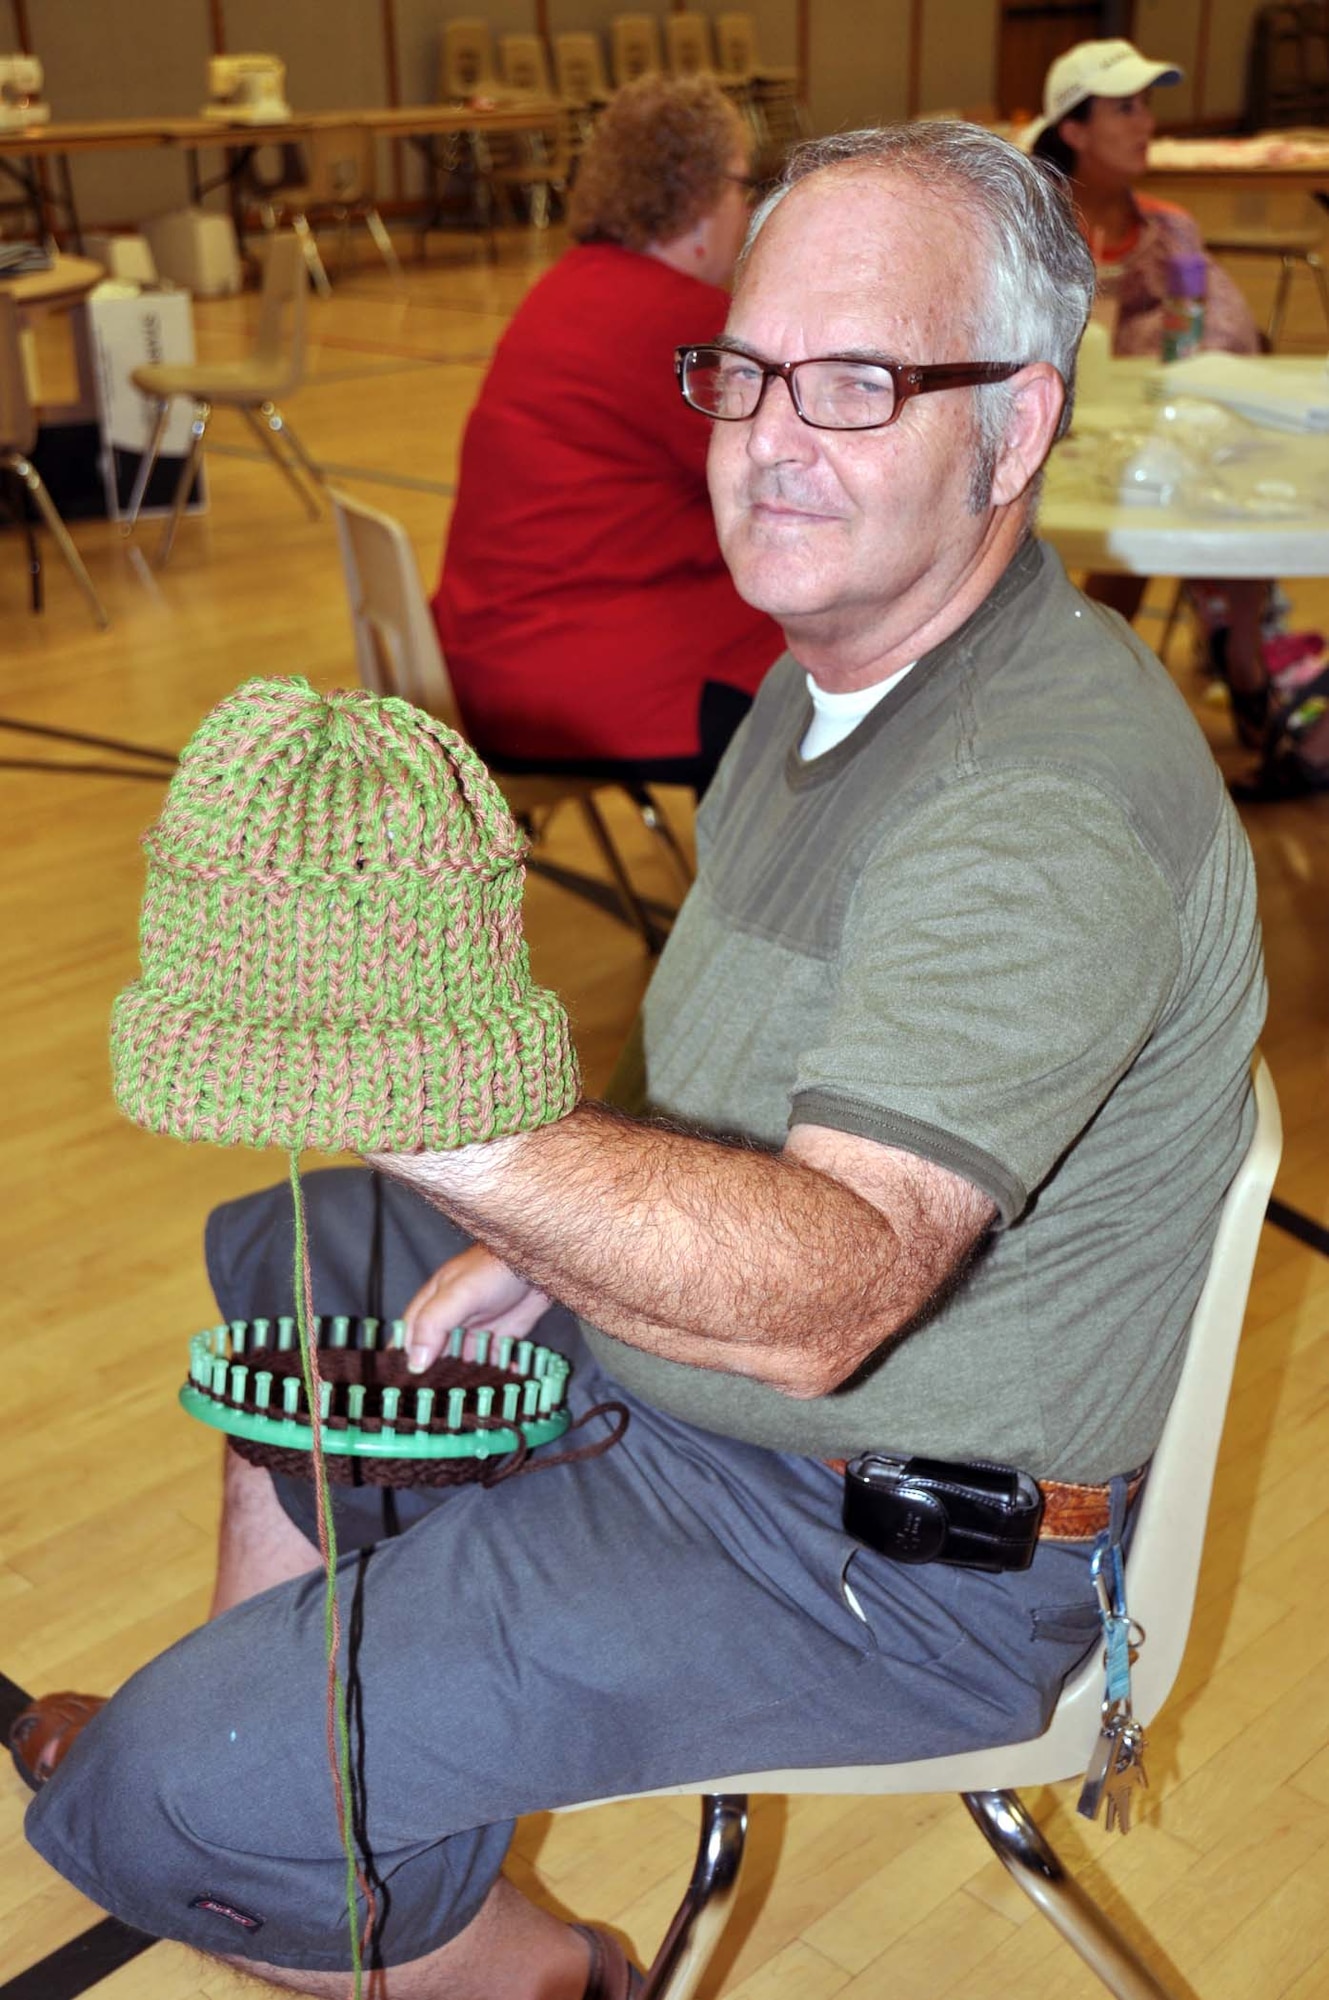 Richard Philbin, 62, of Redlands, Calif., makes a hat during a weekly volunteer session with Women of Faith in Redlands, Calif., for shipment to Afghanistan as part of humanitarian cargo through the Denton Amendment, a U. S. government program that offers free shipment for this cargo via military aircraft on a space available basis.  The group also donates to local hospitals.  (U.S. Air Force photo/Linda Welz)